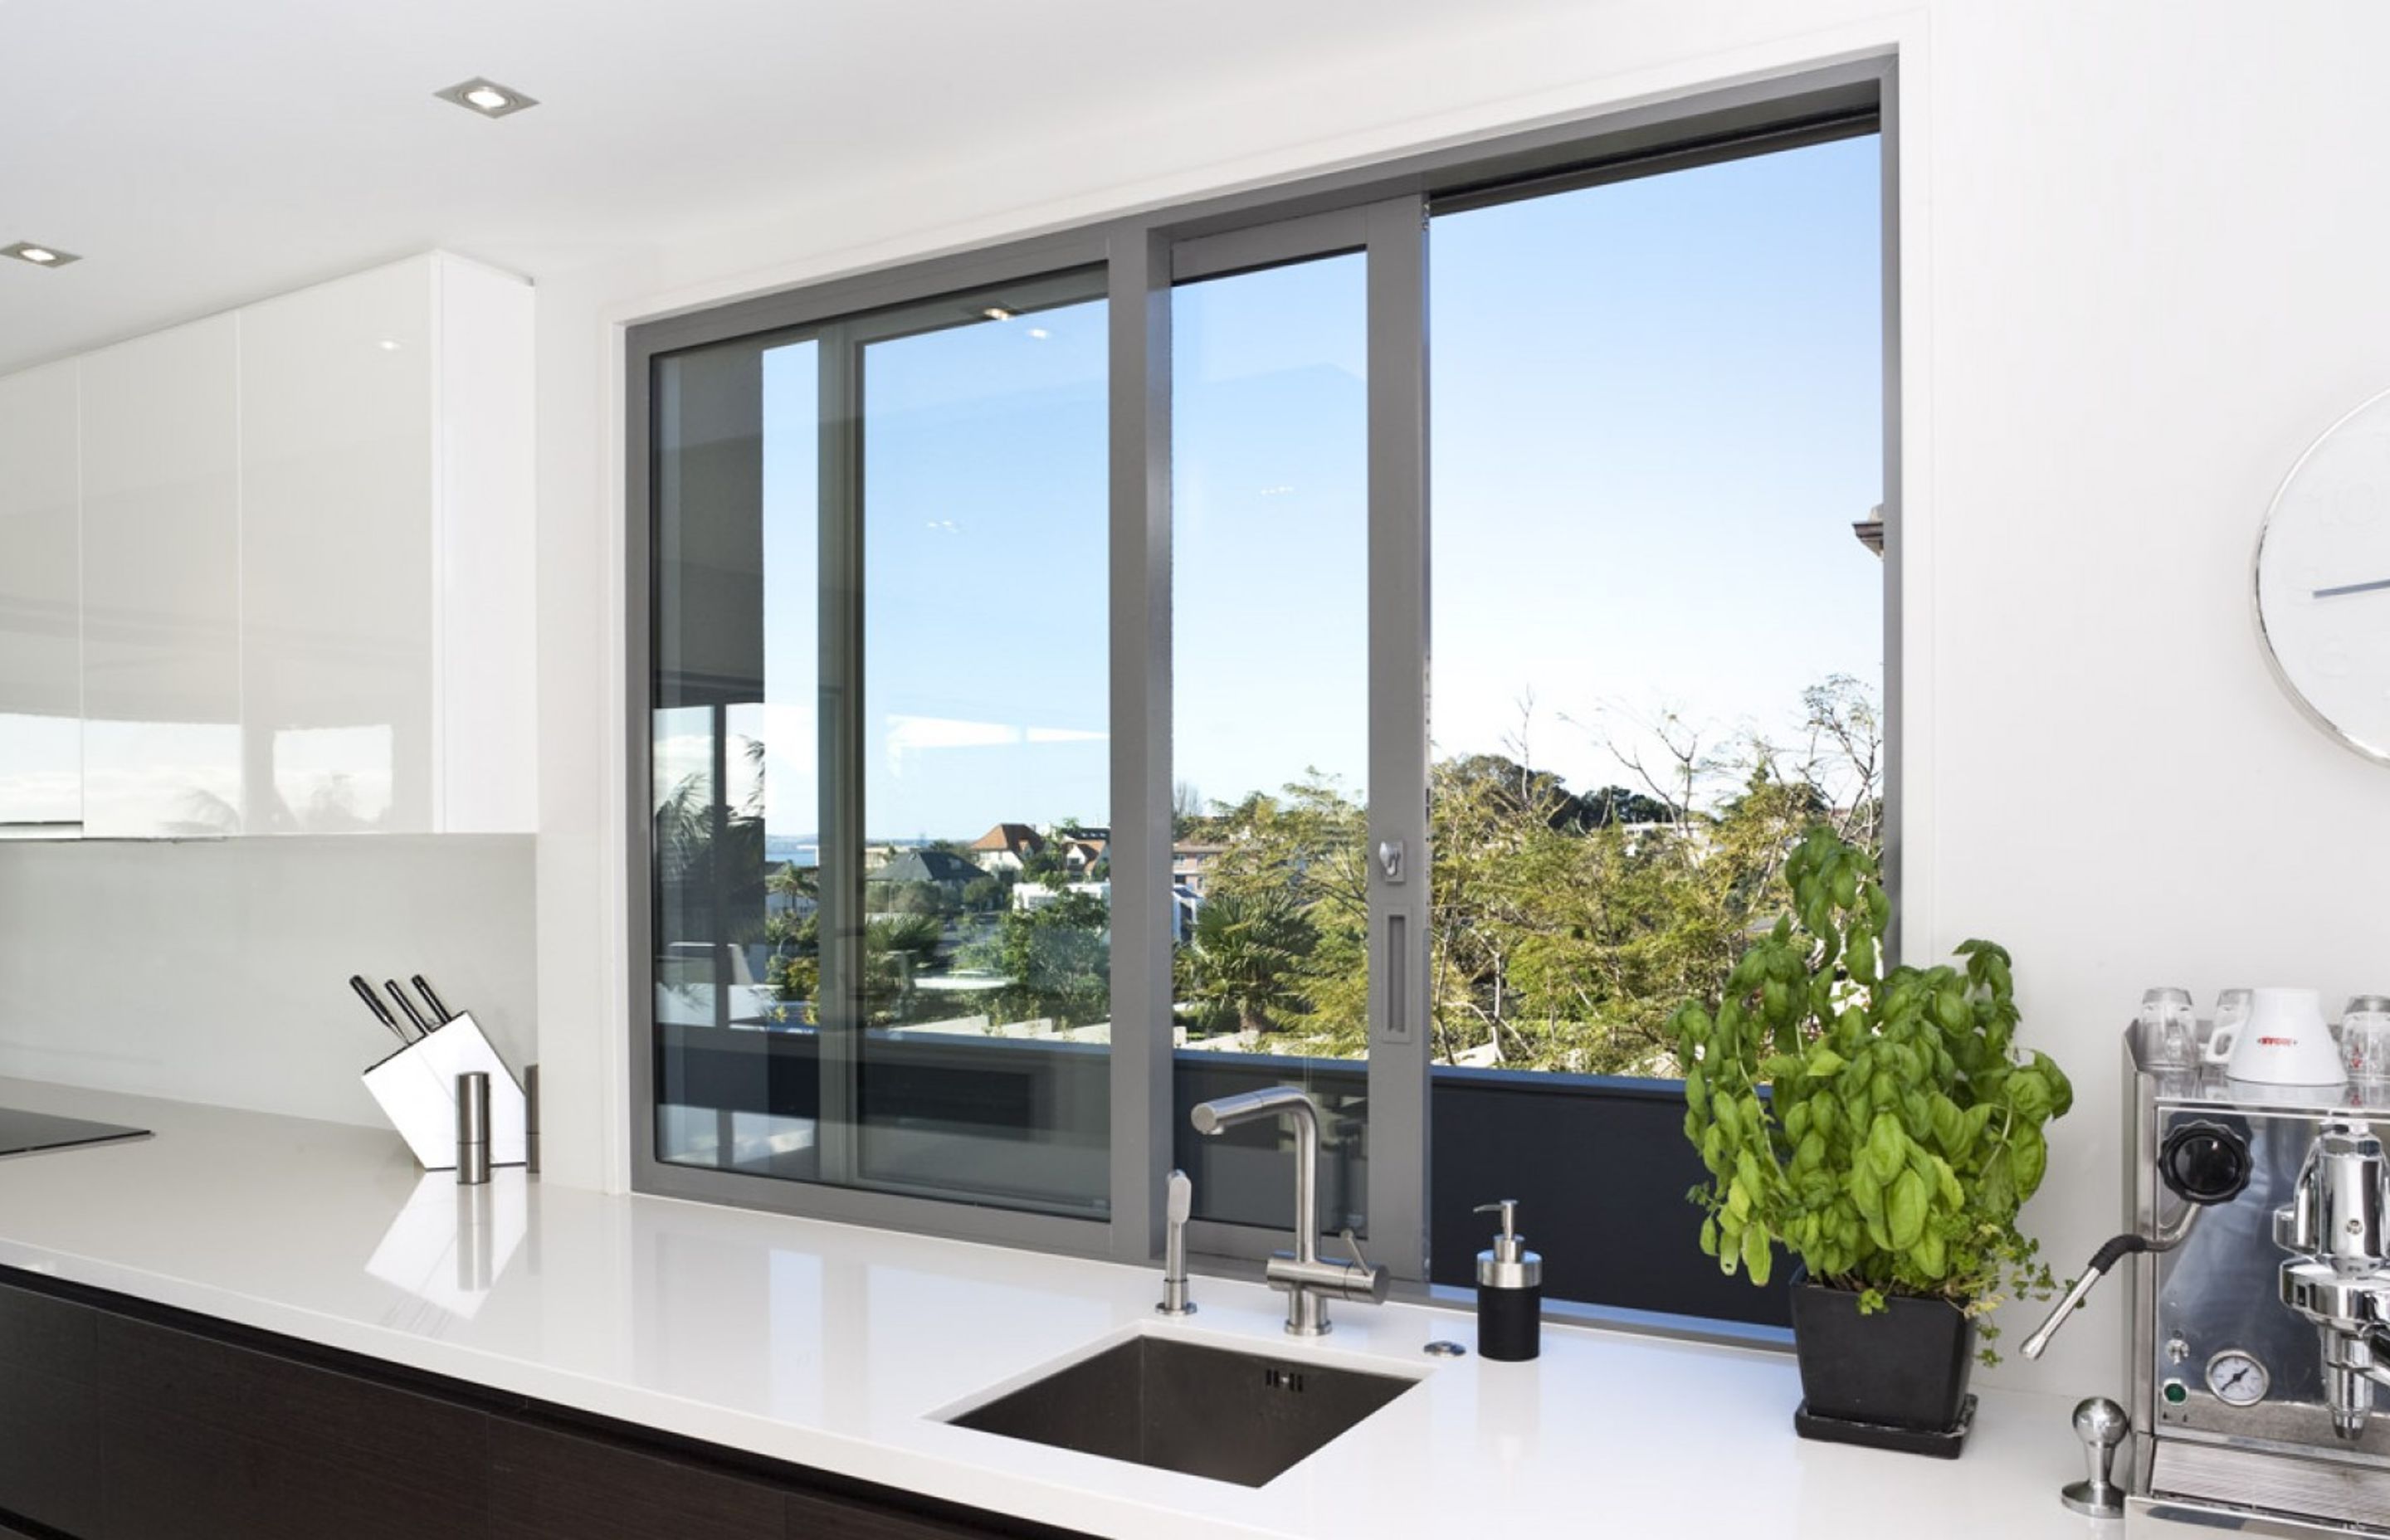 Improve your home environment with double and triple glazing